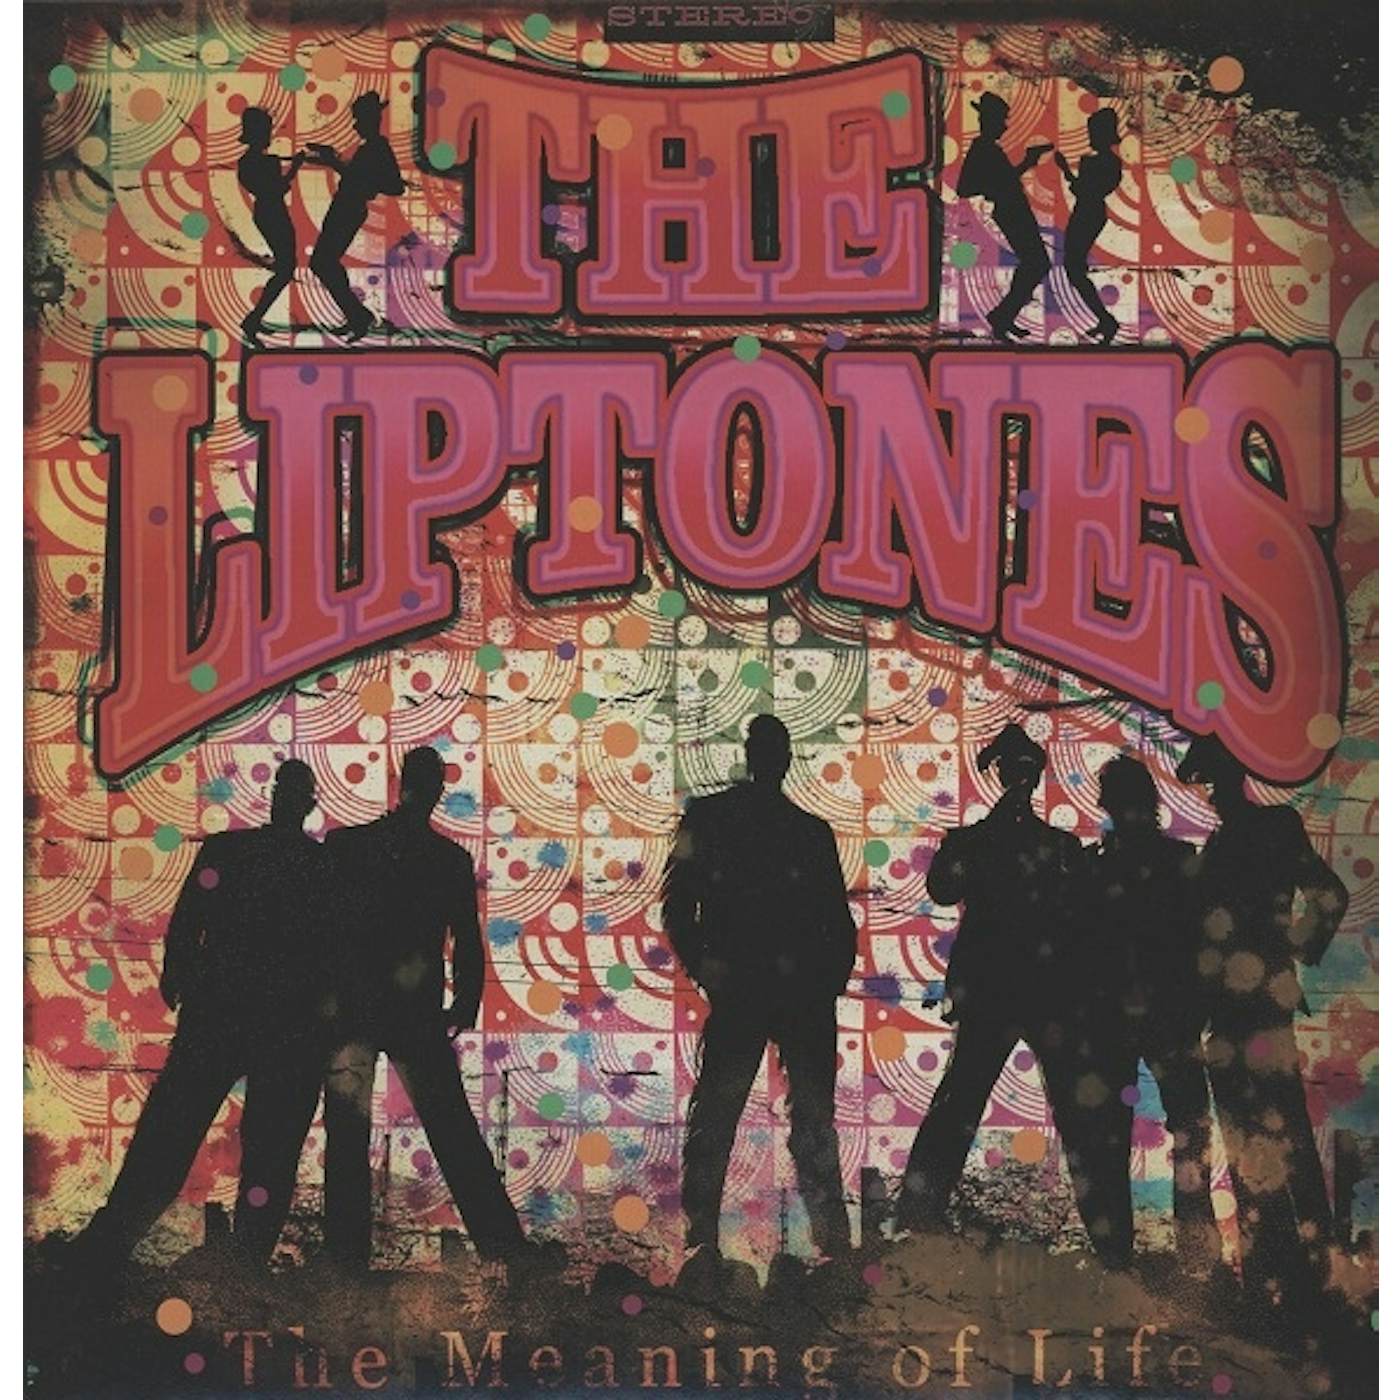 The Liptones MEANING OF LIFE Vinyl Record